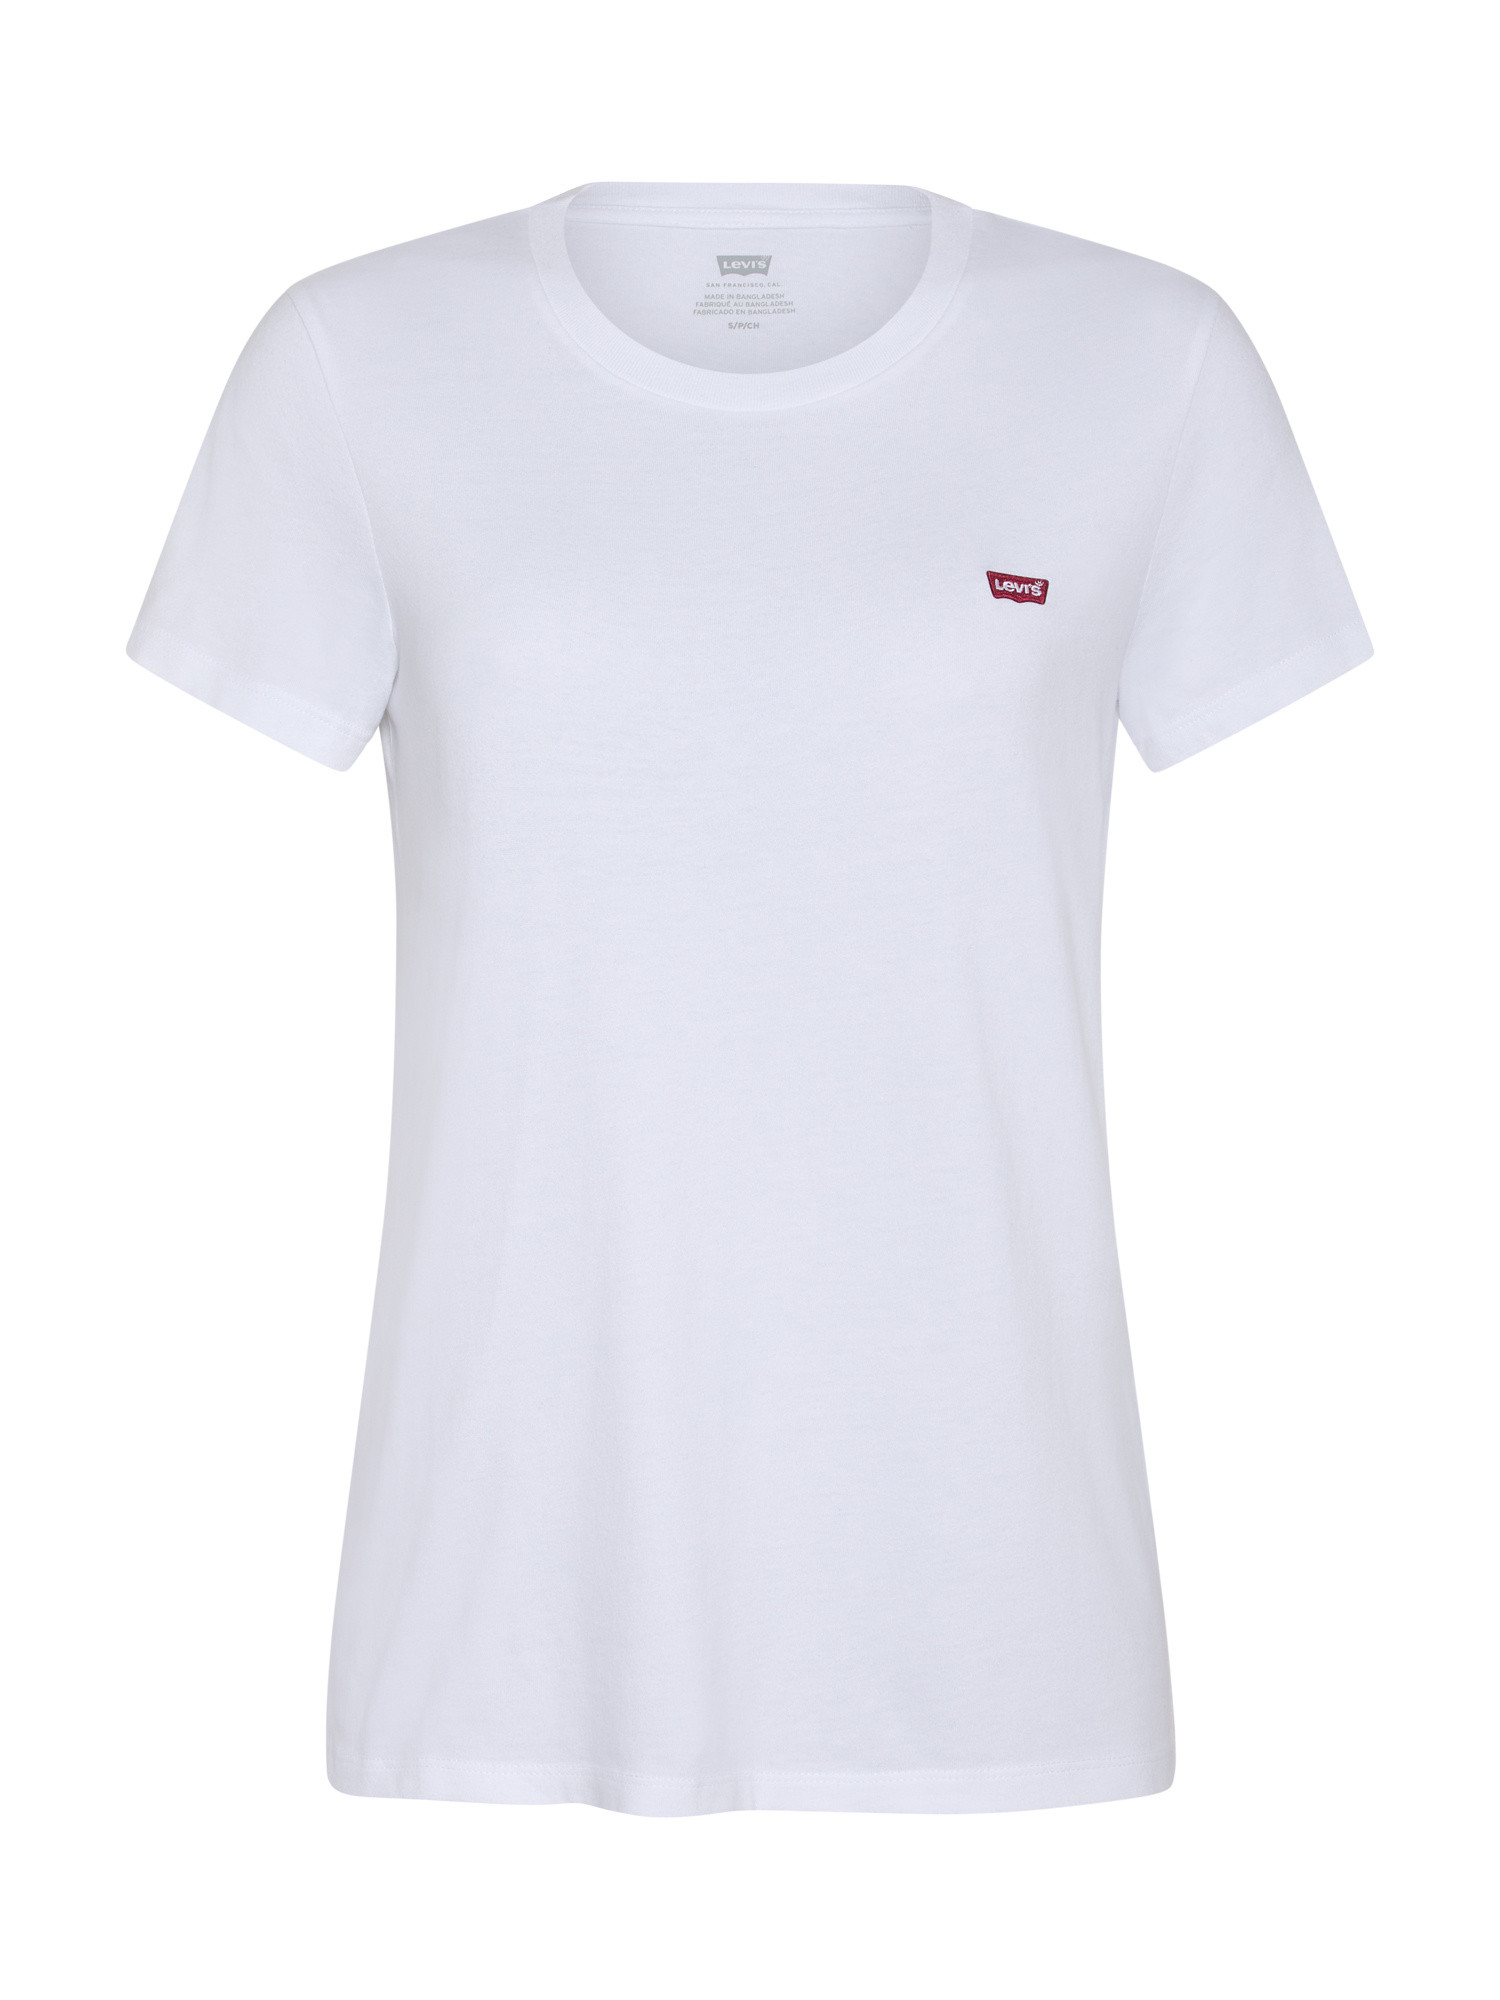 Levi's - T-shirt in cotone con logo, Bianco, large image number 0